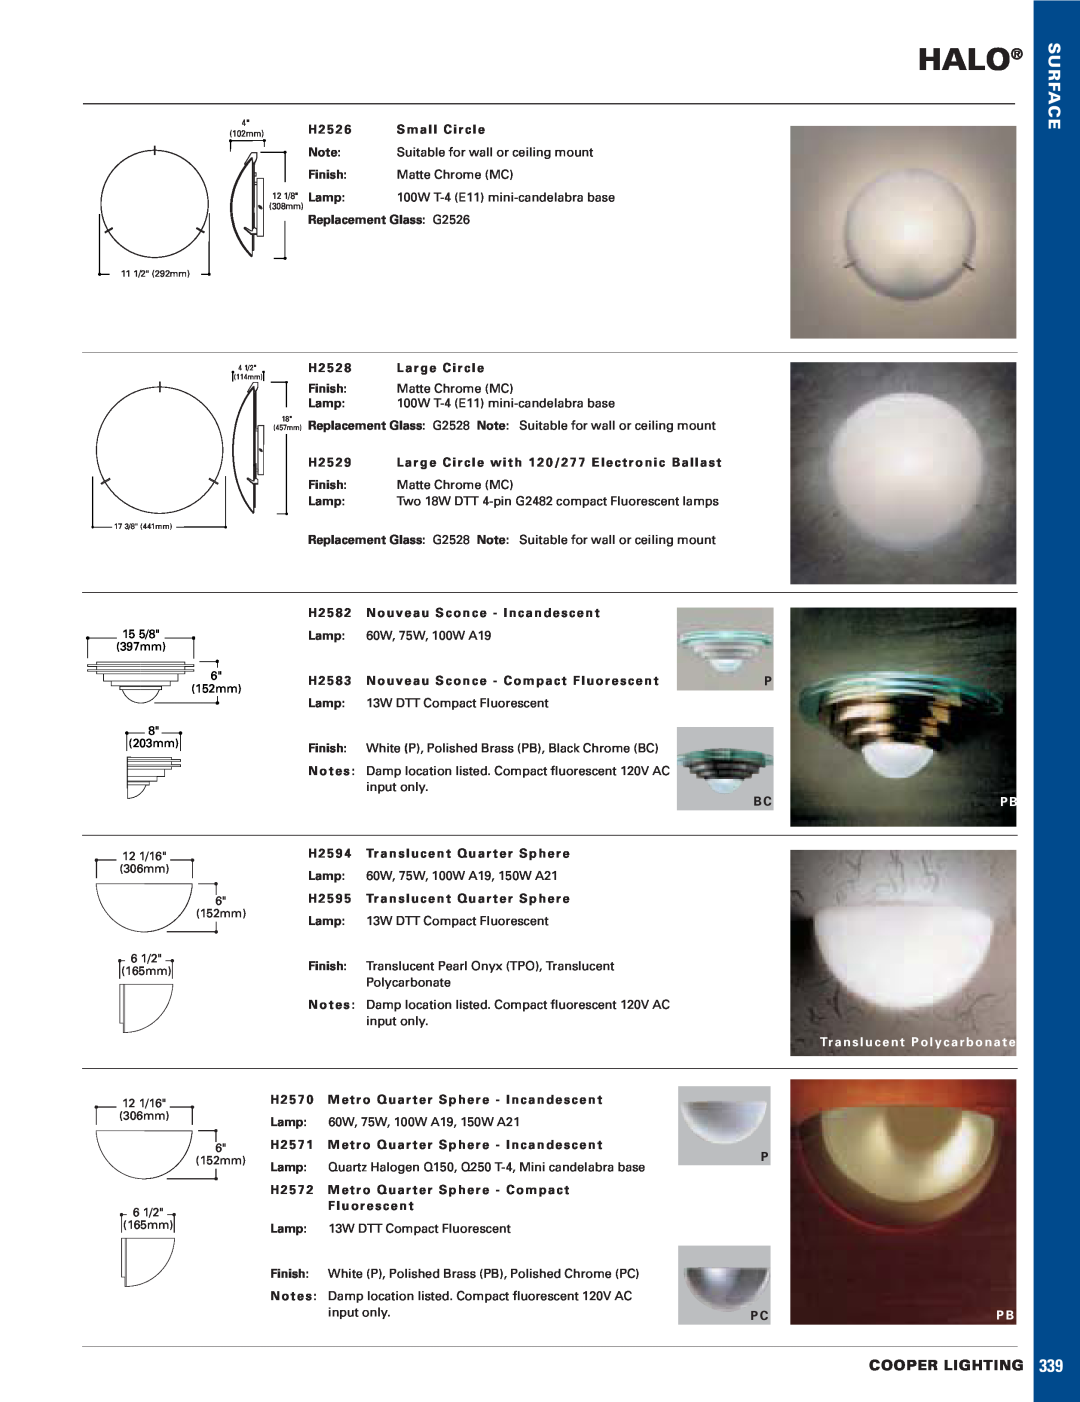 Cooper Lighting H2595, H2583 manual Halo, Surface, Cooper Lighting, Tr a n s l u c e n t P o l y c a r b o n a t e 